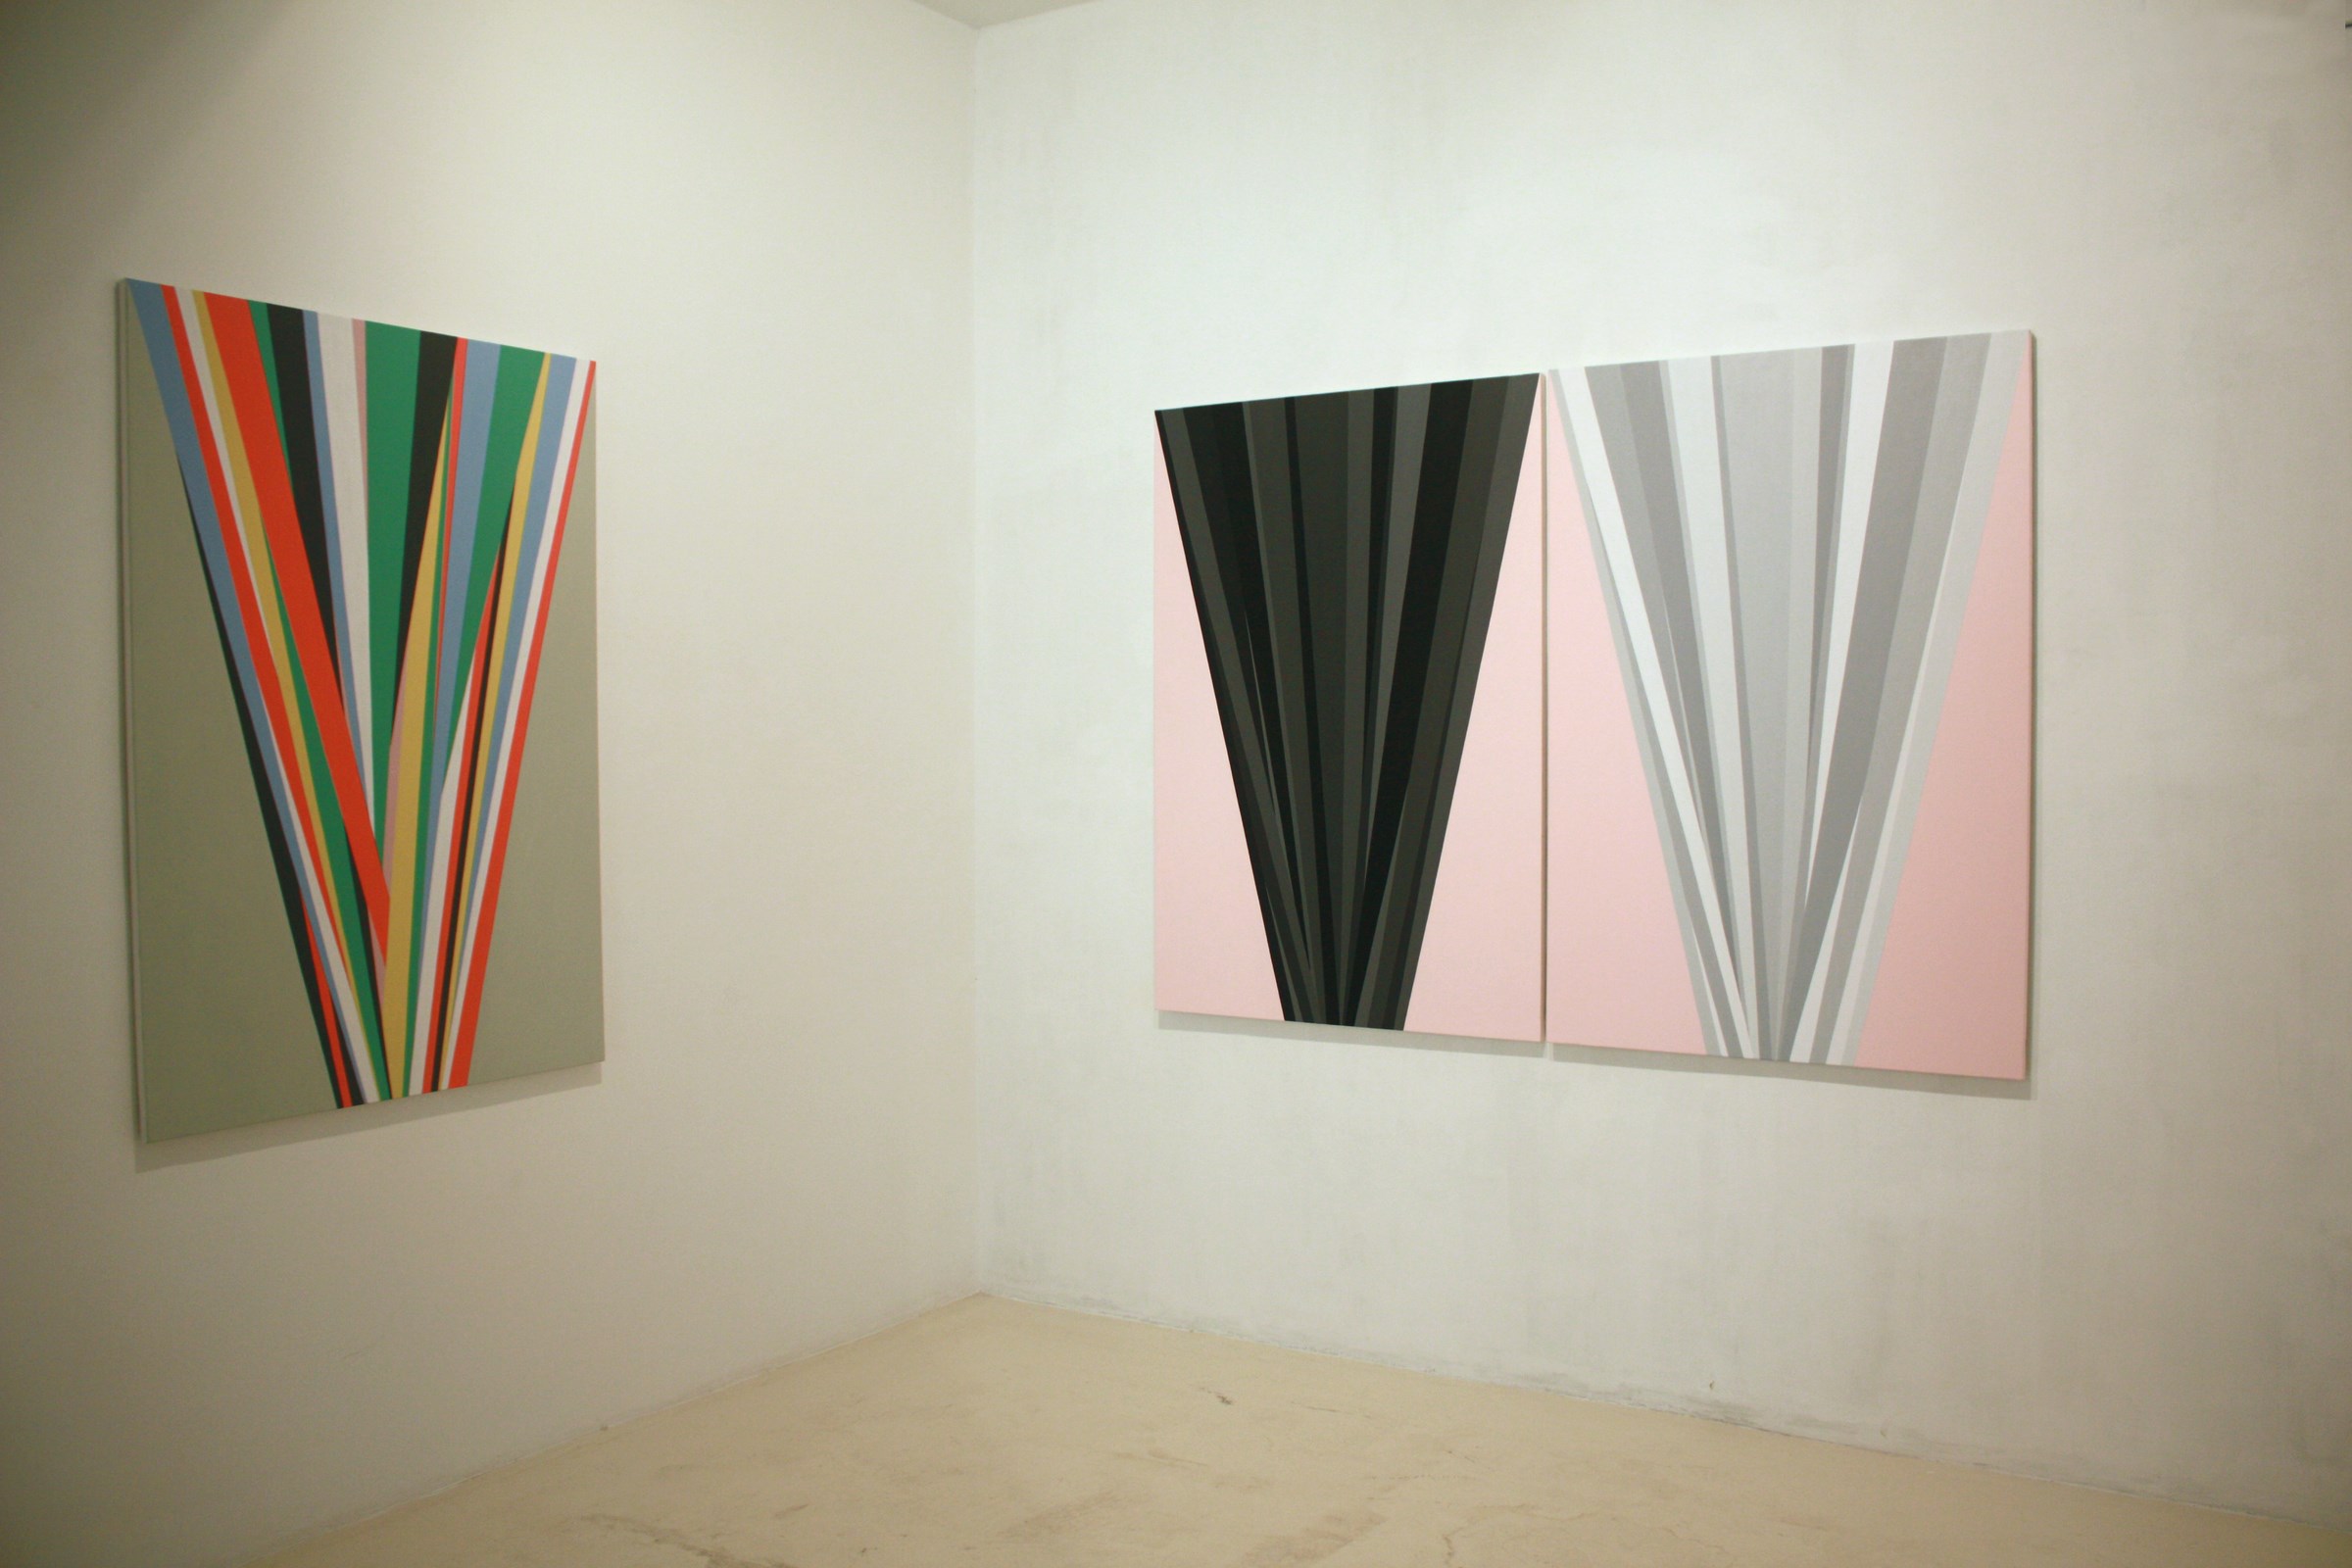 Exhibition view in the Galería Maior of Palma, 2013